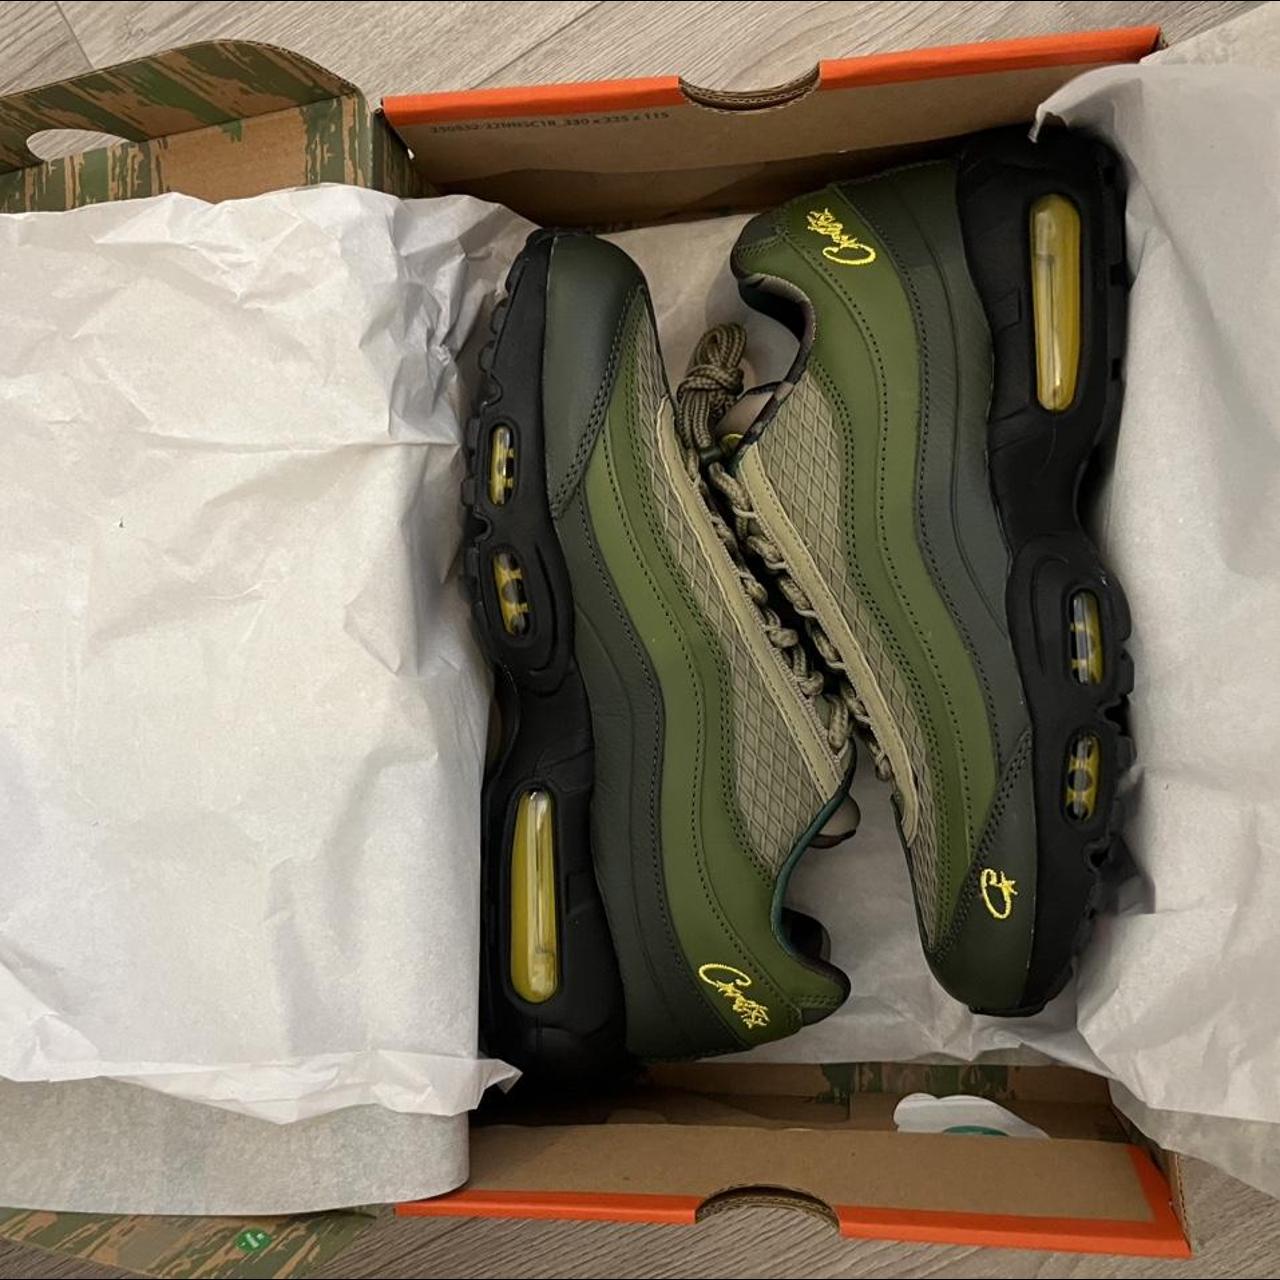 CRTZ Nike Air Max 95 rare collab sold out in 2... - Depop